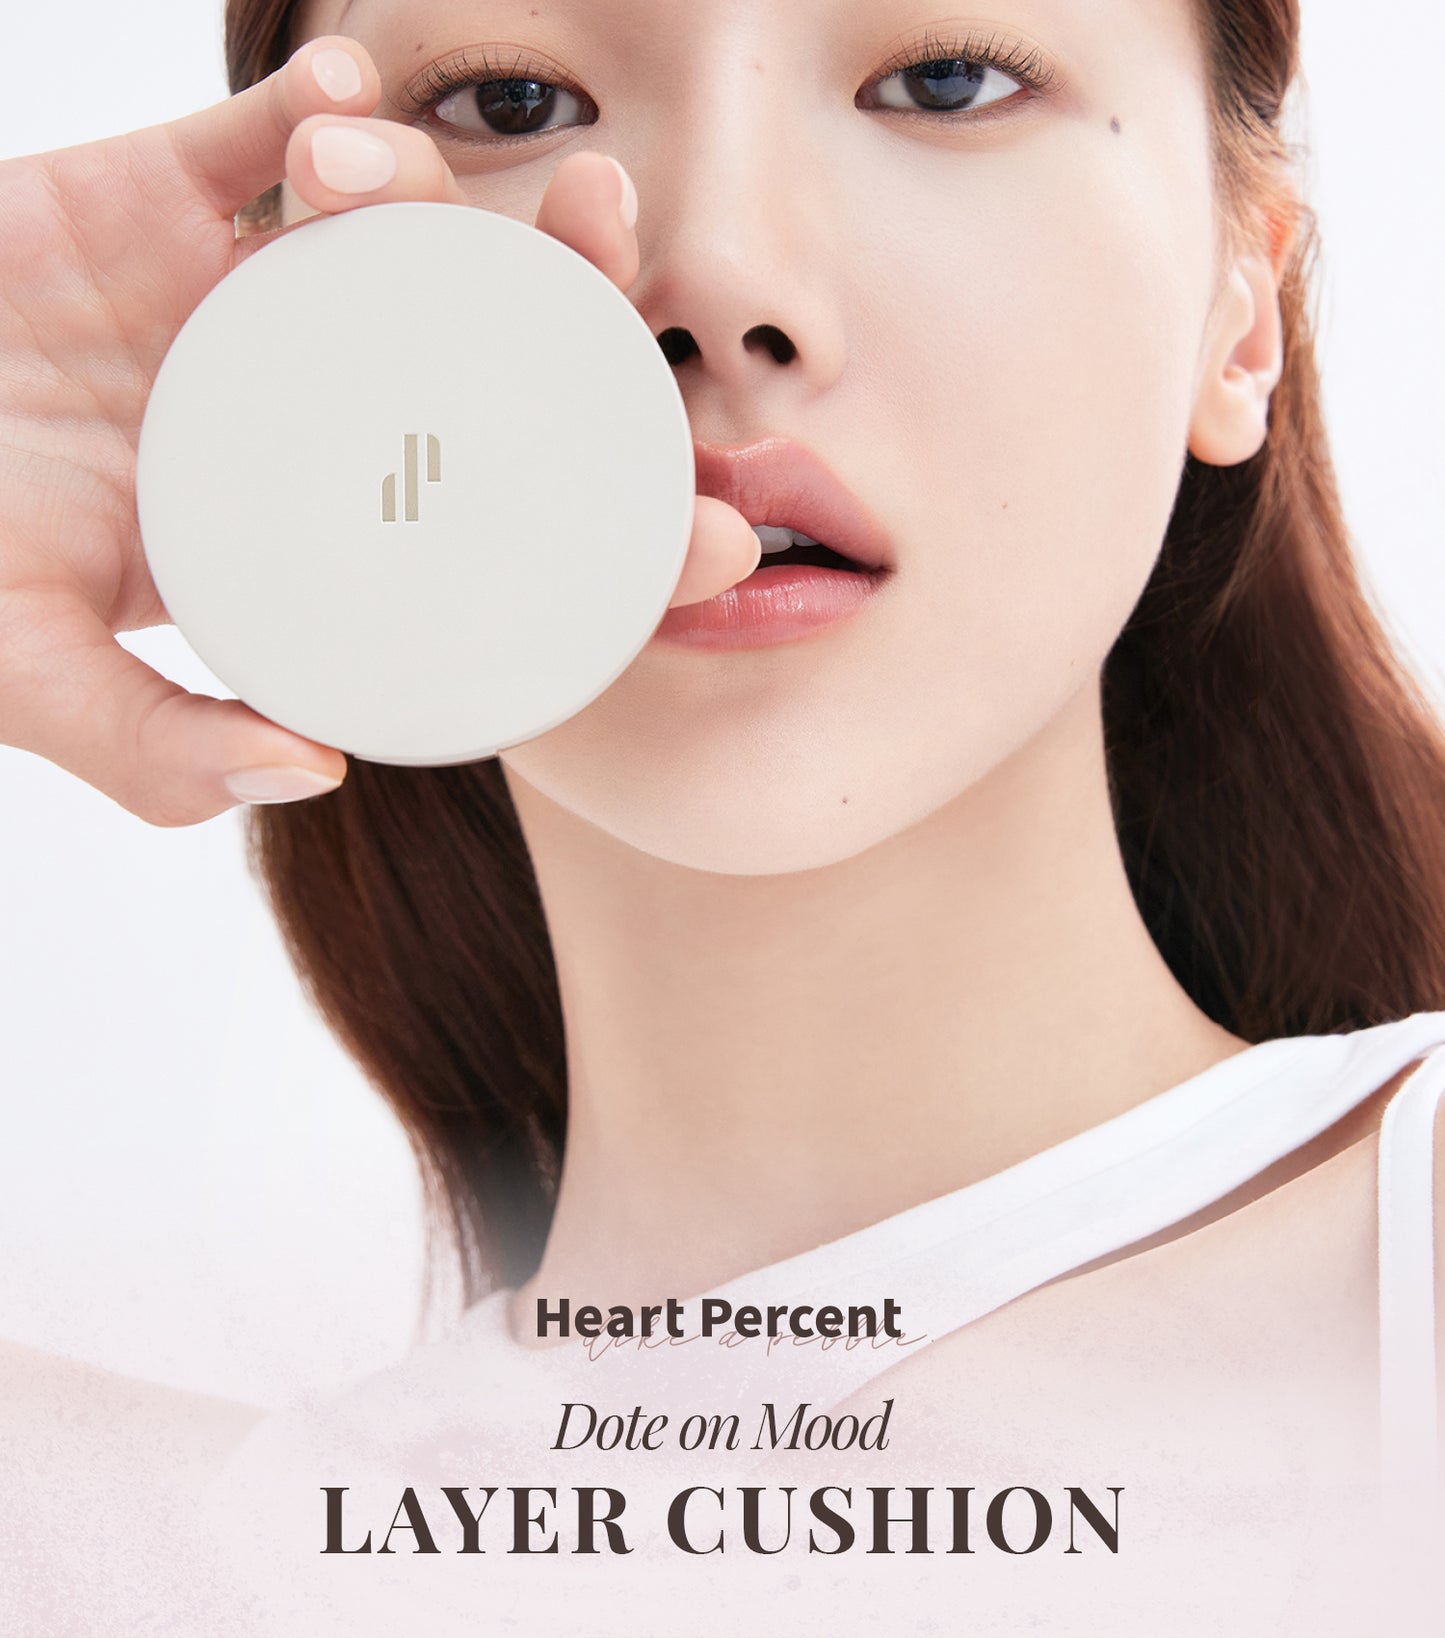 Heart Percent Dote on Mood Layer Cushion SPF 50+/PA+++ with Refill